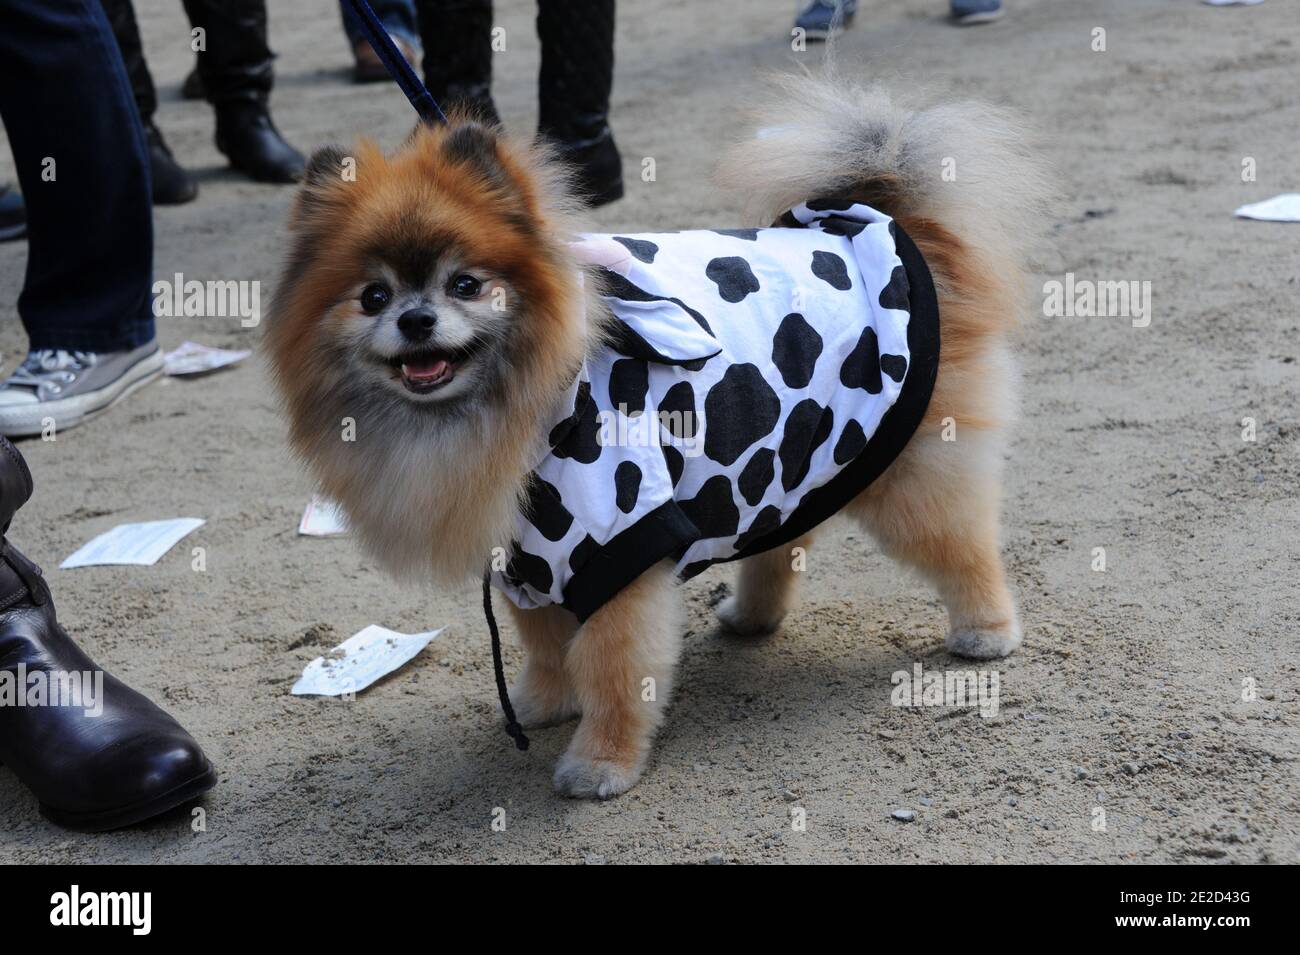 PHOTOS: Canine Promenade 2013 - 3rd Annual Dog Costume Contest and Parade  at the Esplanade